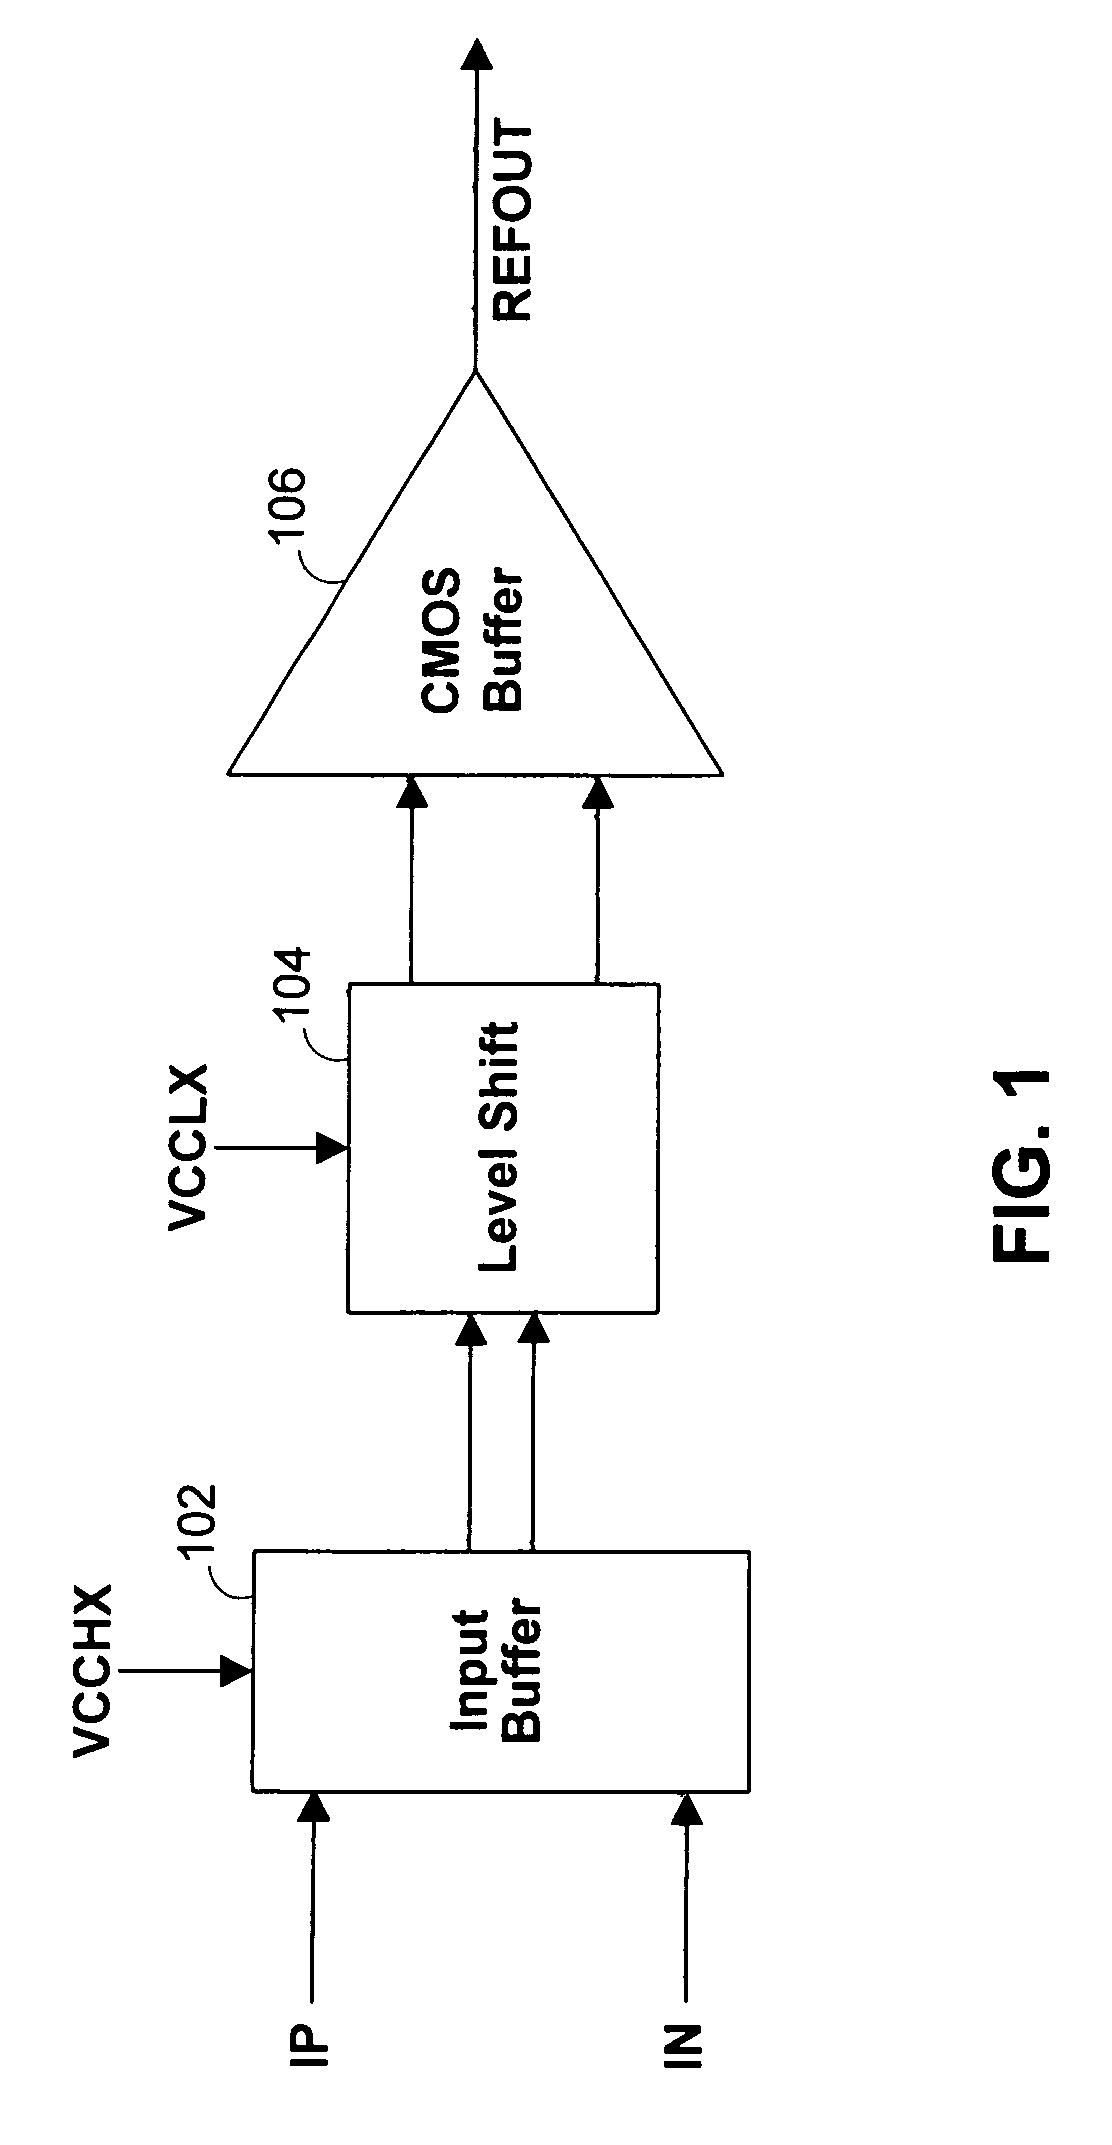 Reference clock receiver compliant with LVPECL, LVDS and PCI-Express supporting both AC coupling and DC coupling